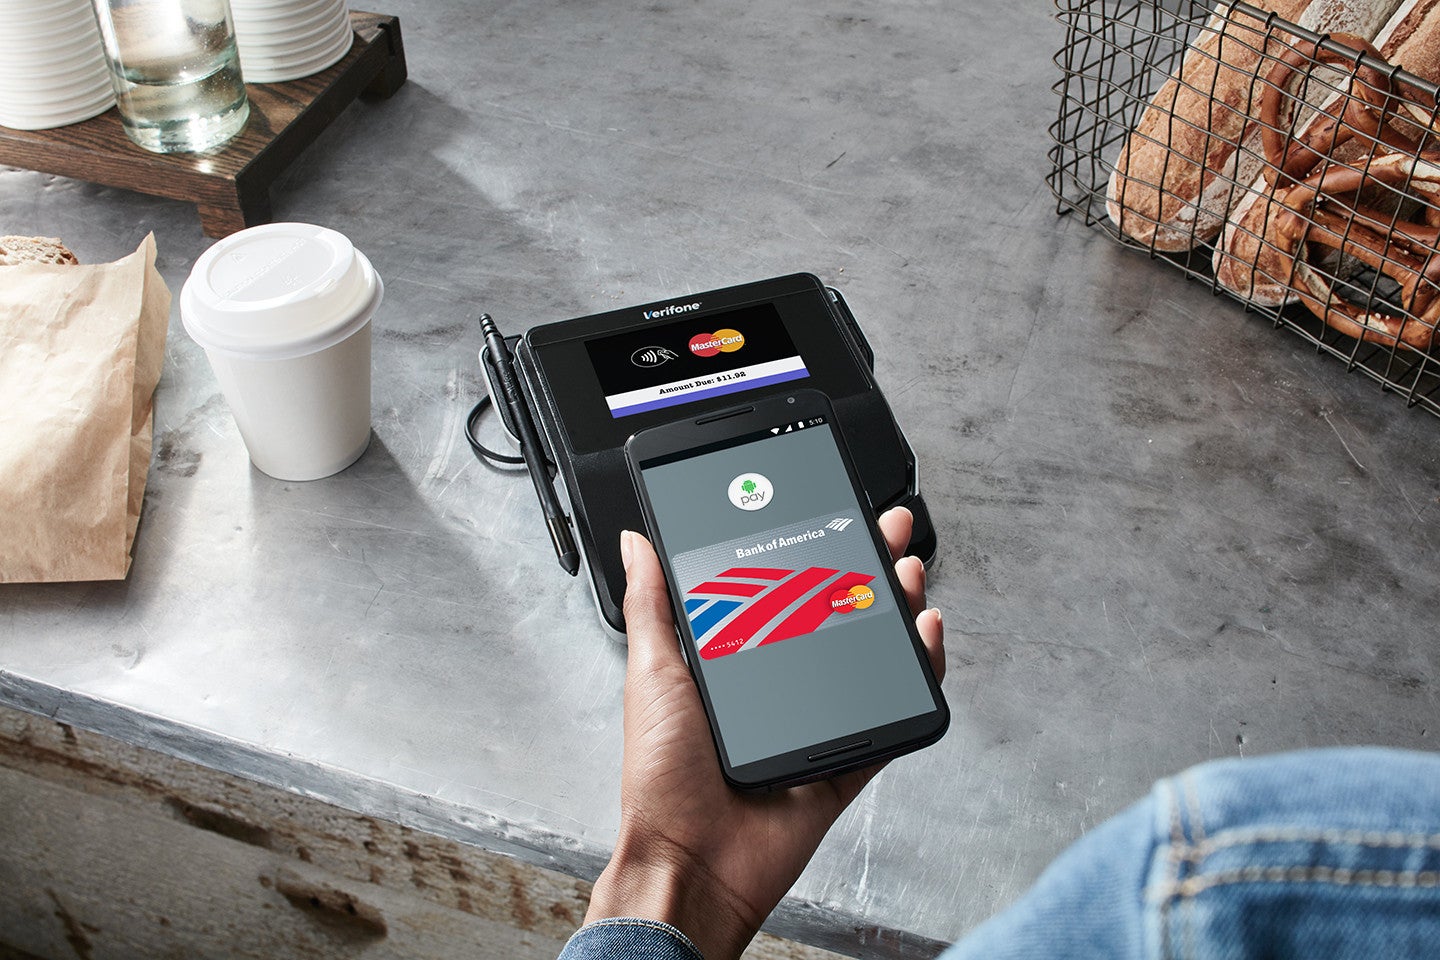 If you have an unlocked bootloader on your phone, Android Pay will now no longer work